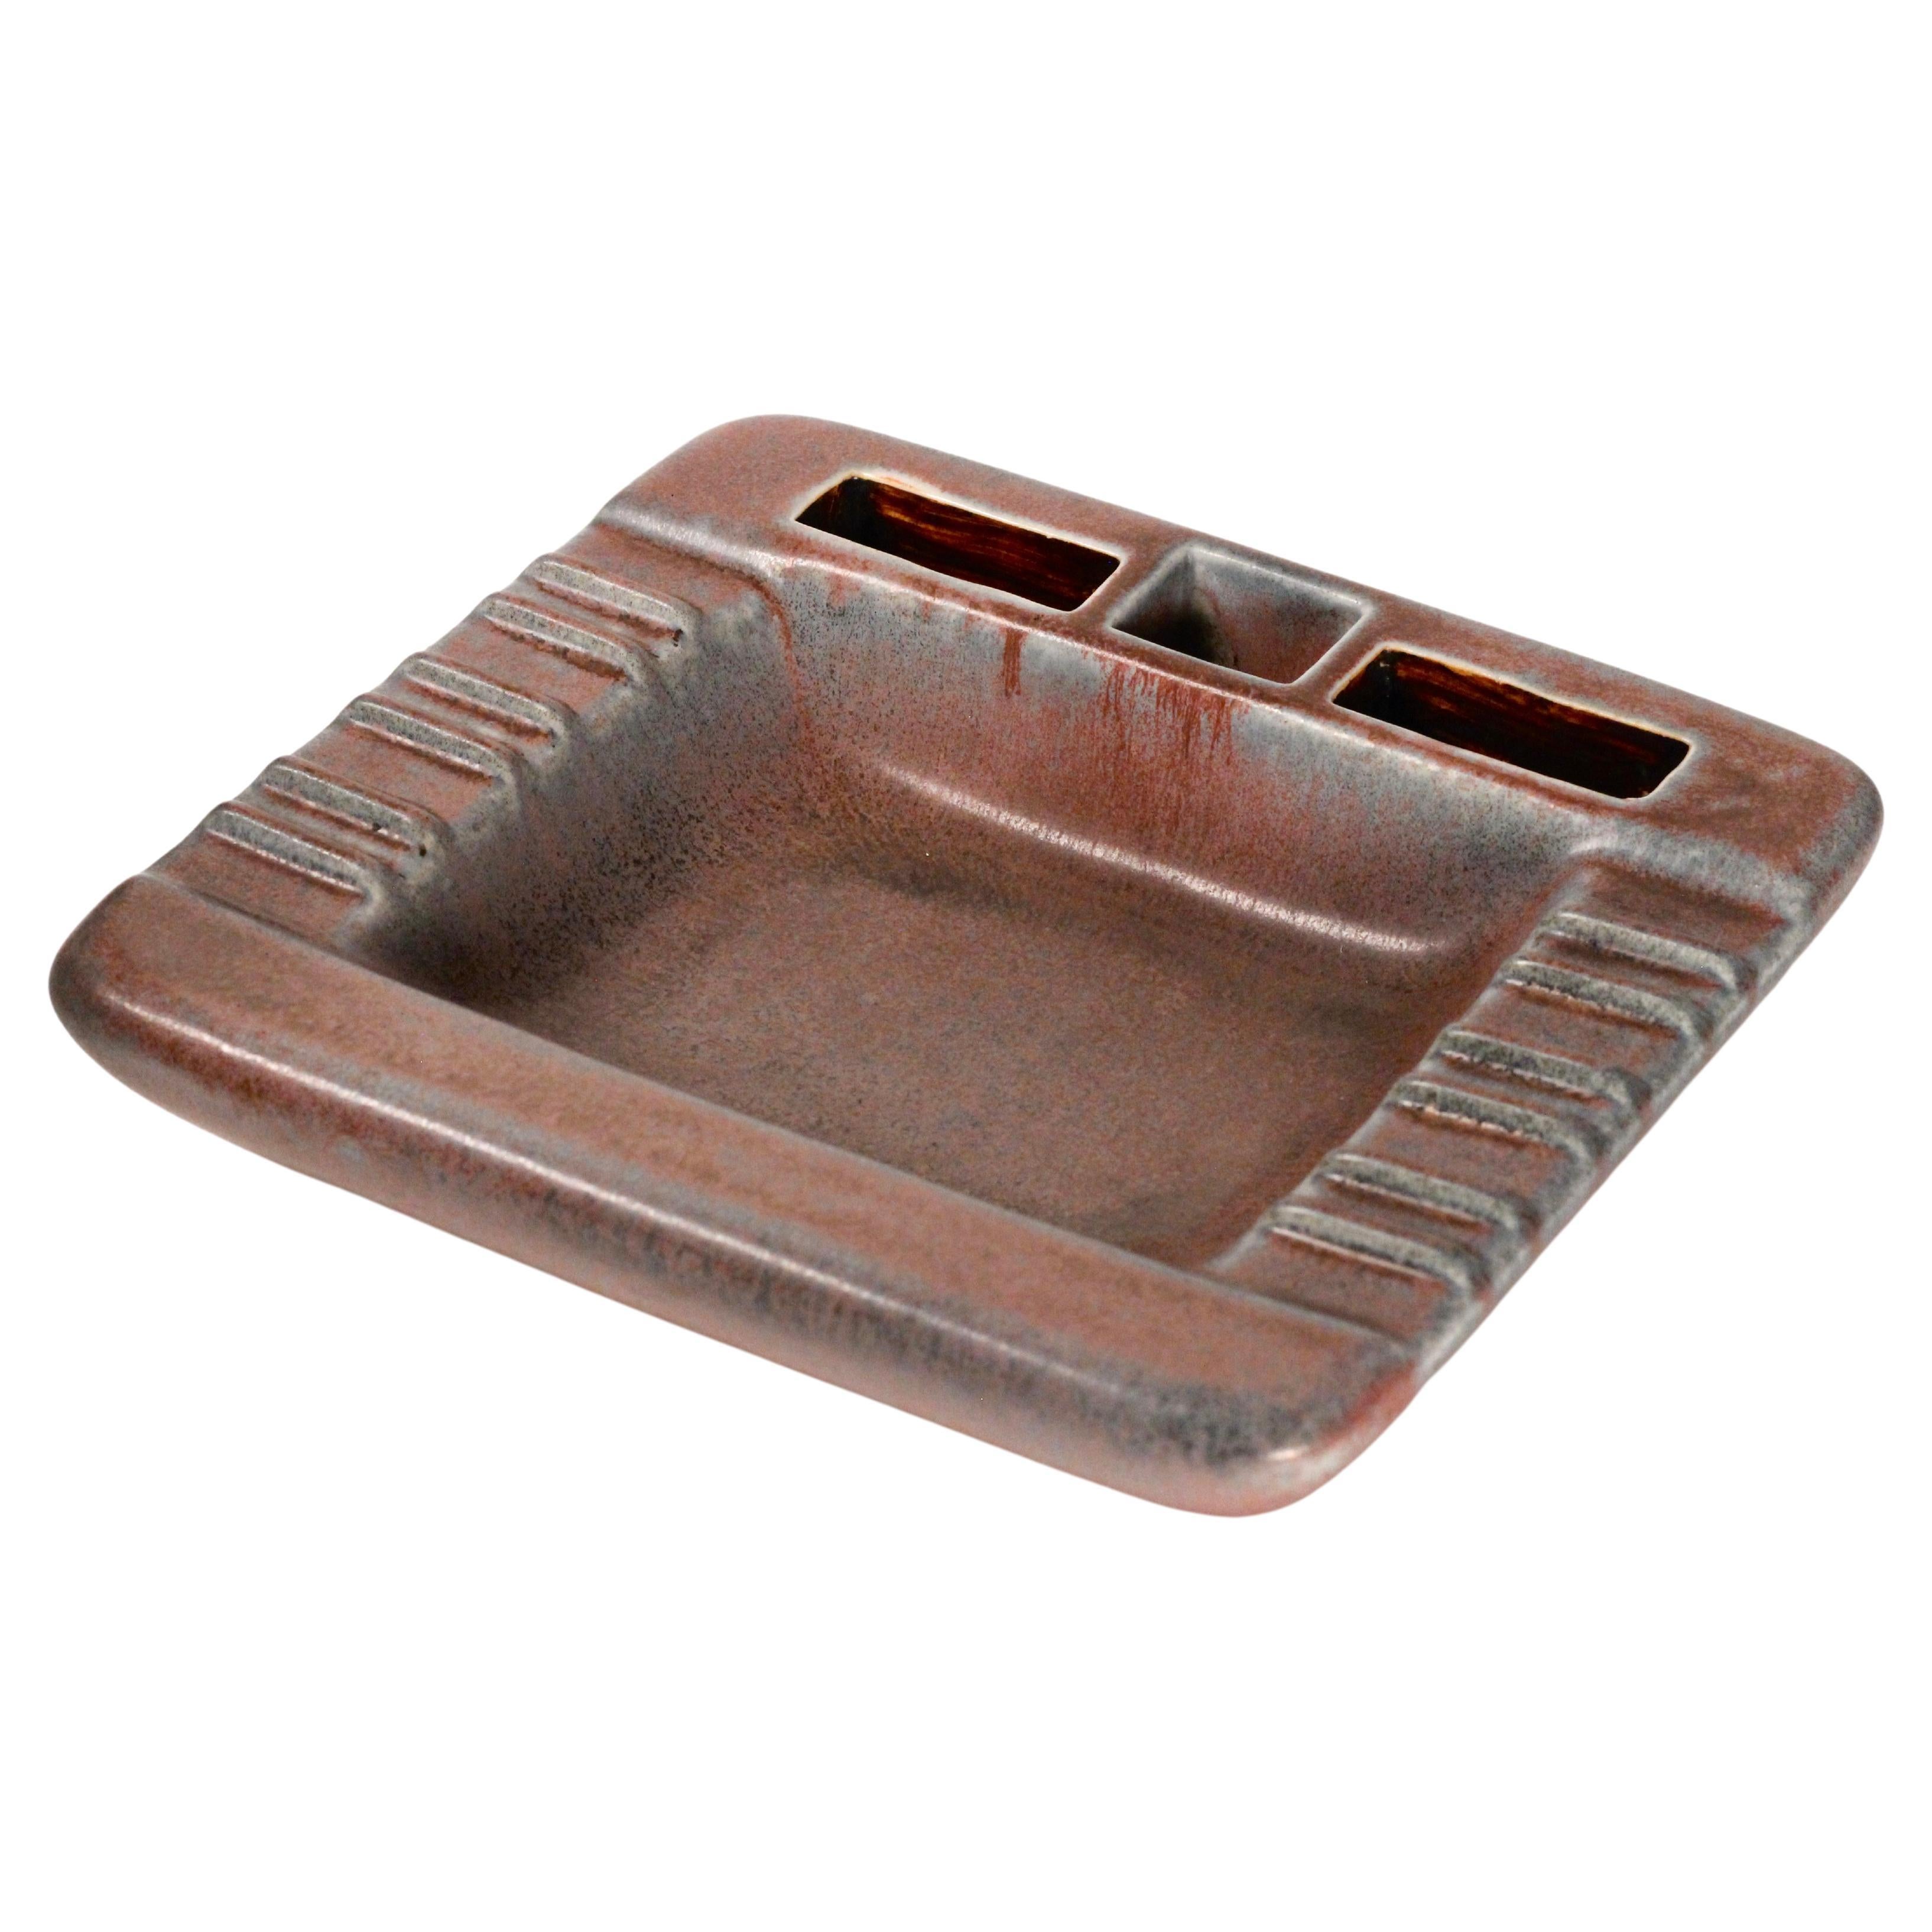  Scandinavian modern large ceramic ashtray by Gunnar Nylund for Rörstrand 1950’s For Sale